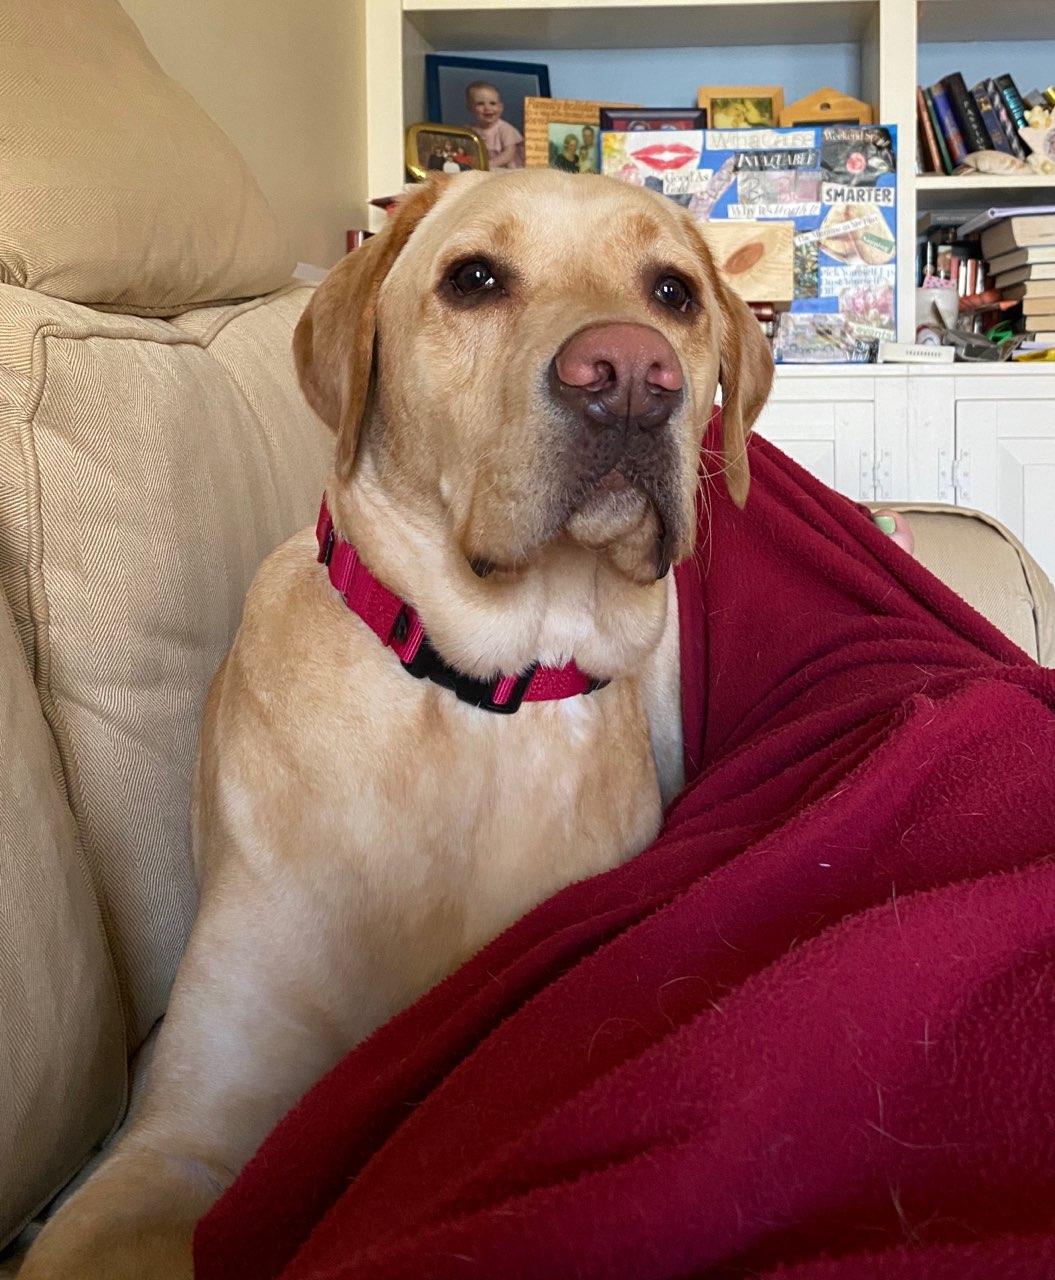 Bruno, the yellow Lab, is the newest member of the Kintisch household. “He makes us laugh he makes us smile.” Courtesy of Jean Kintisch)